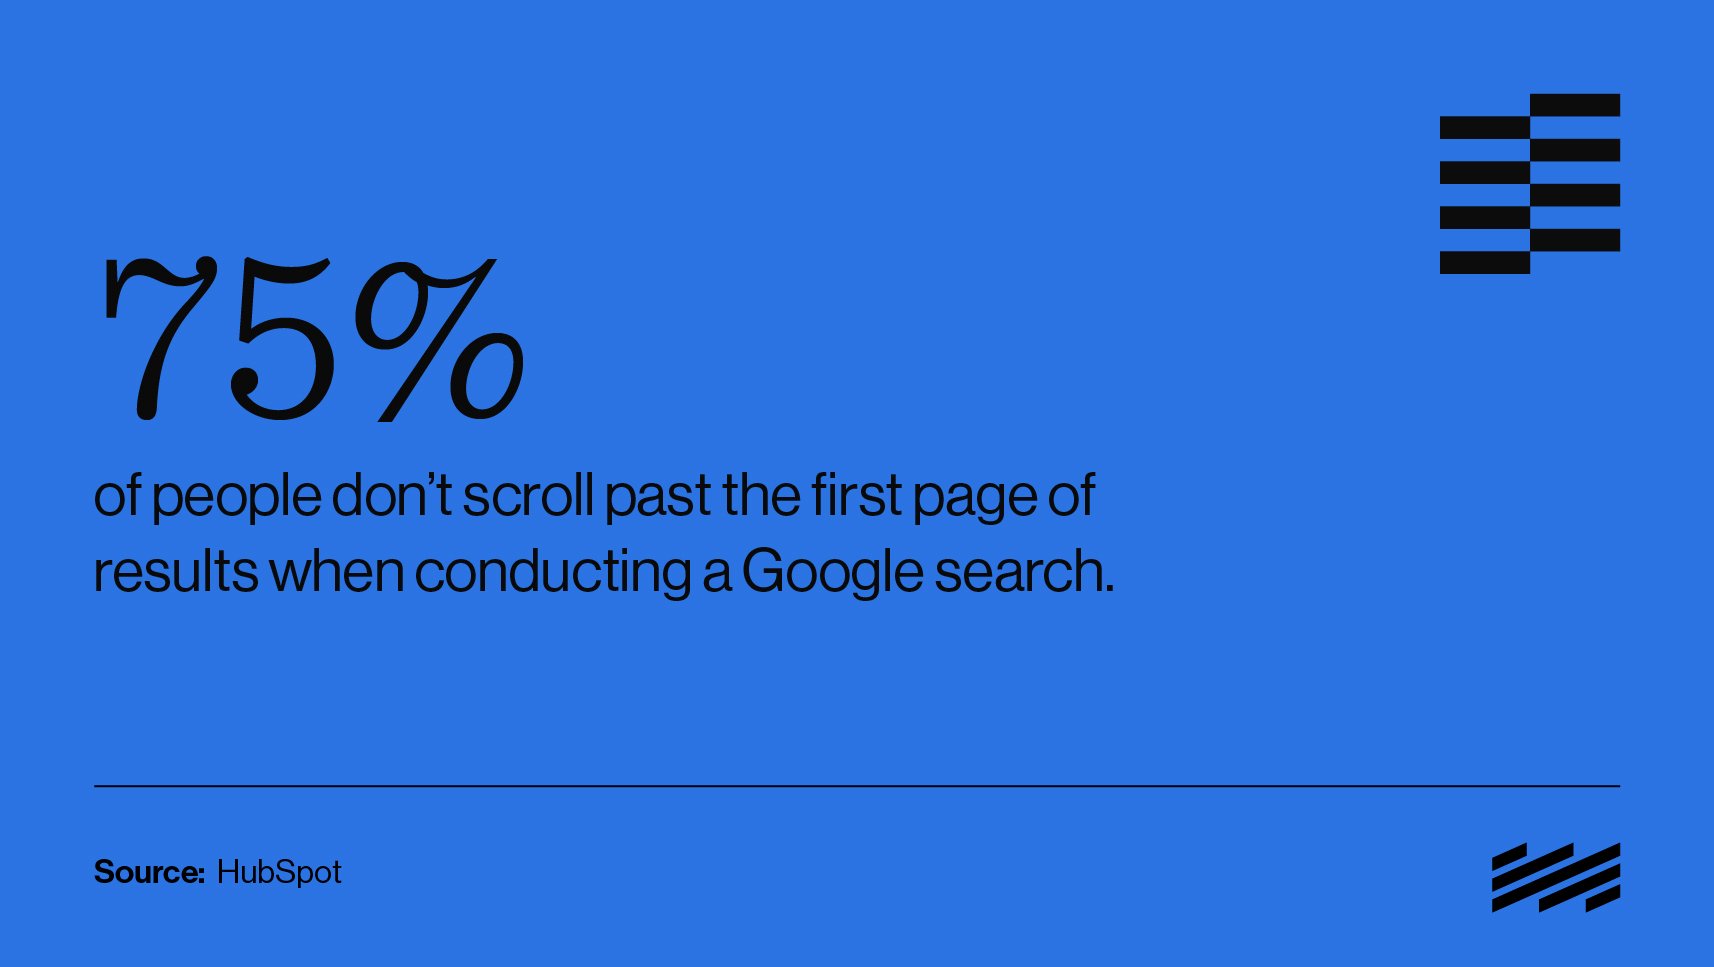 A blue and black graphic treatment of a quote taken directly from the article text that reads 75% of people don't scroll past the first page of results when conducting a Google search